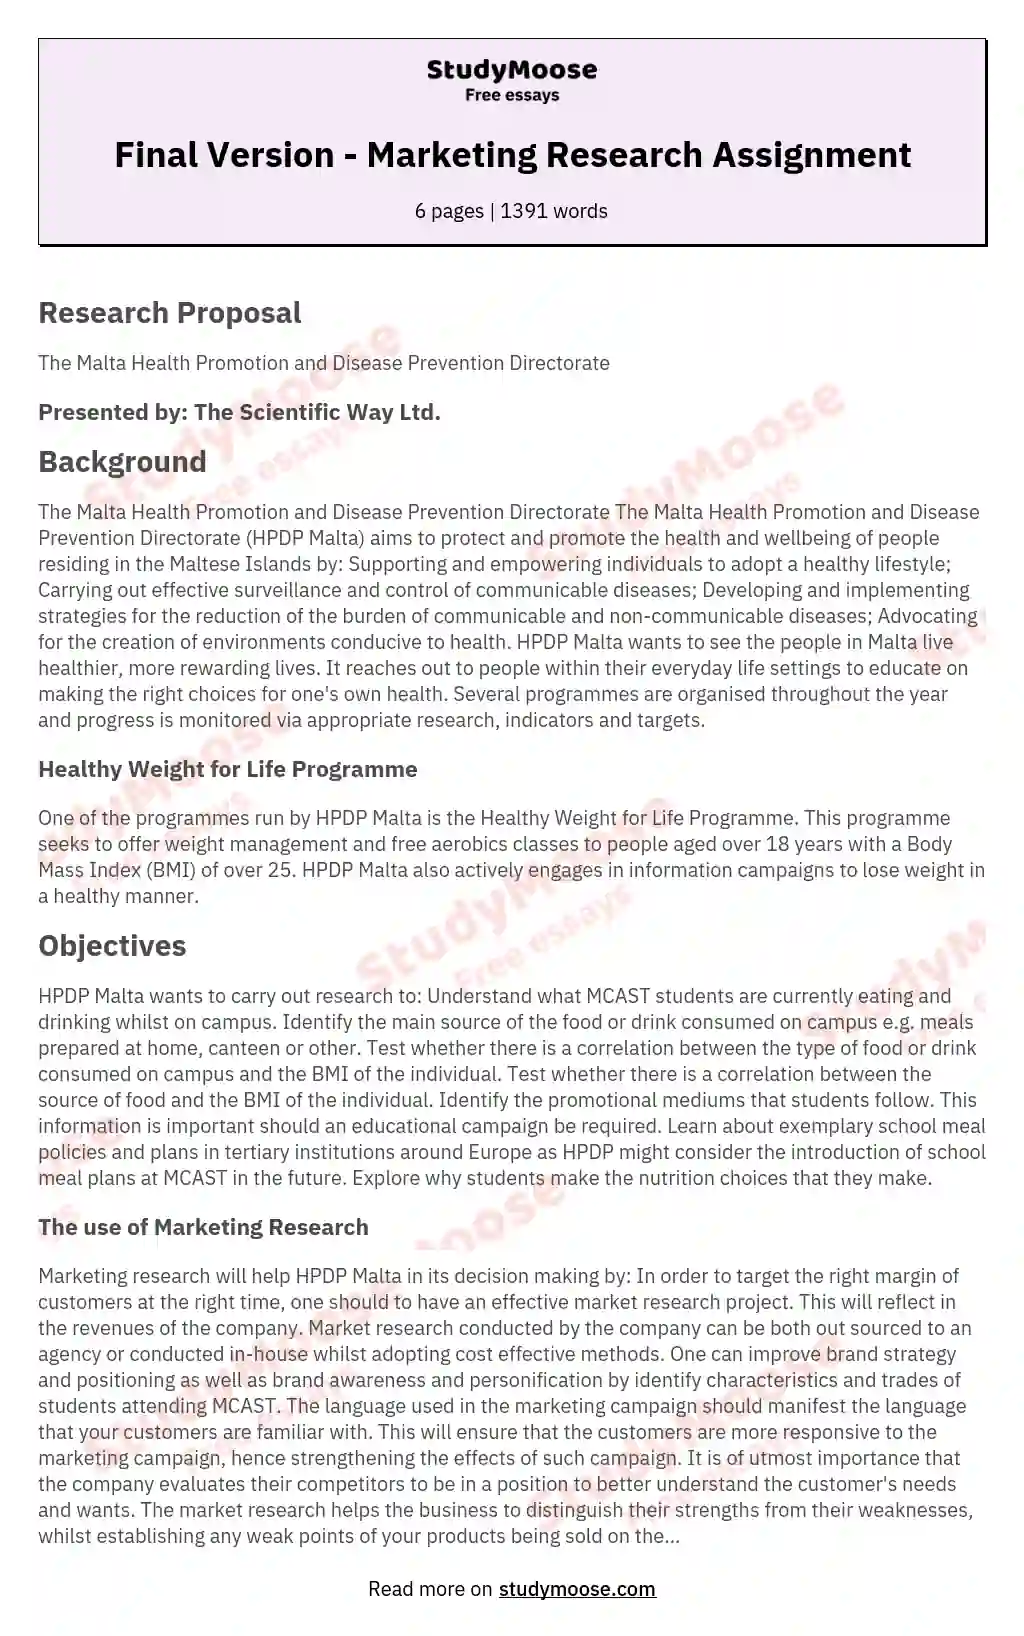 Final Version - Marketing Research Assignment essay